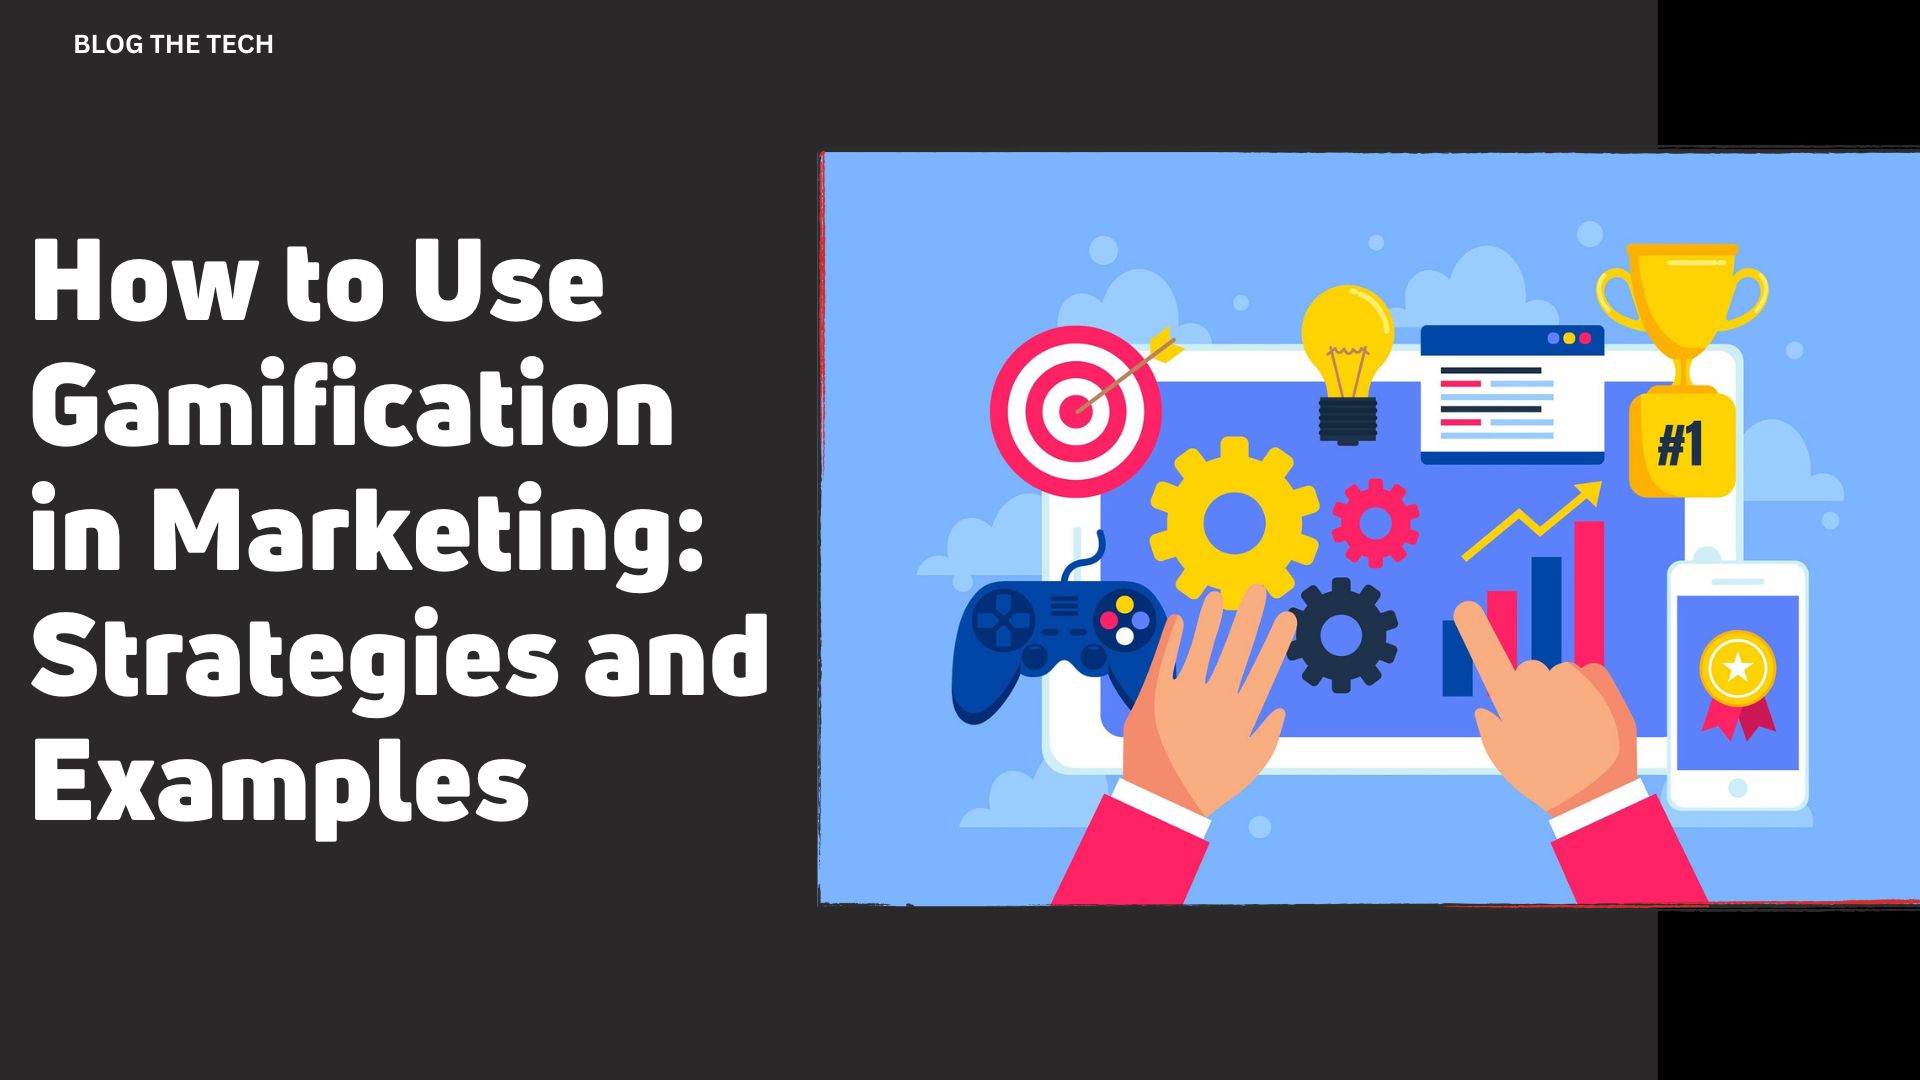 How to Use Gamification in Marketing: Strategies and Examples